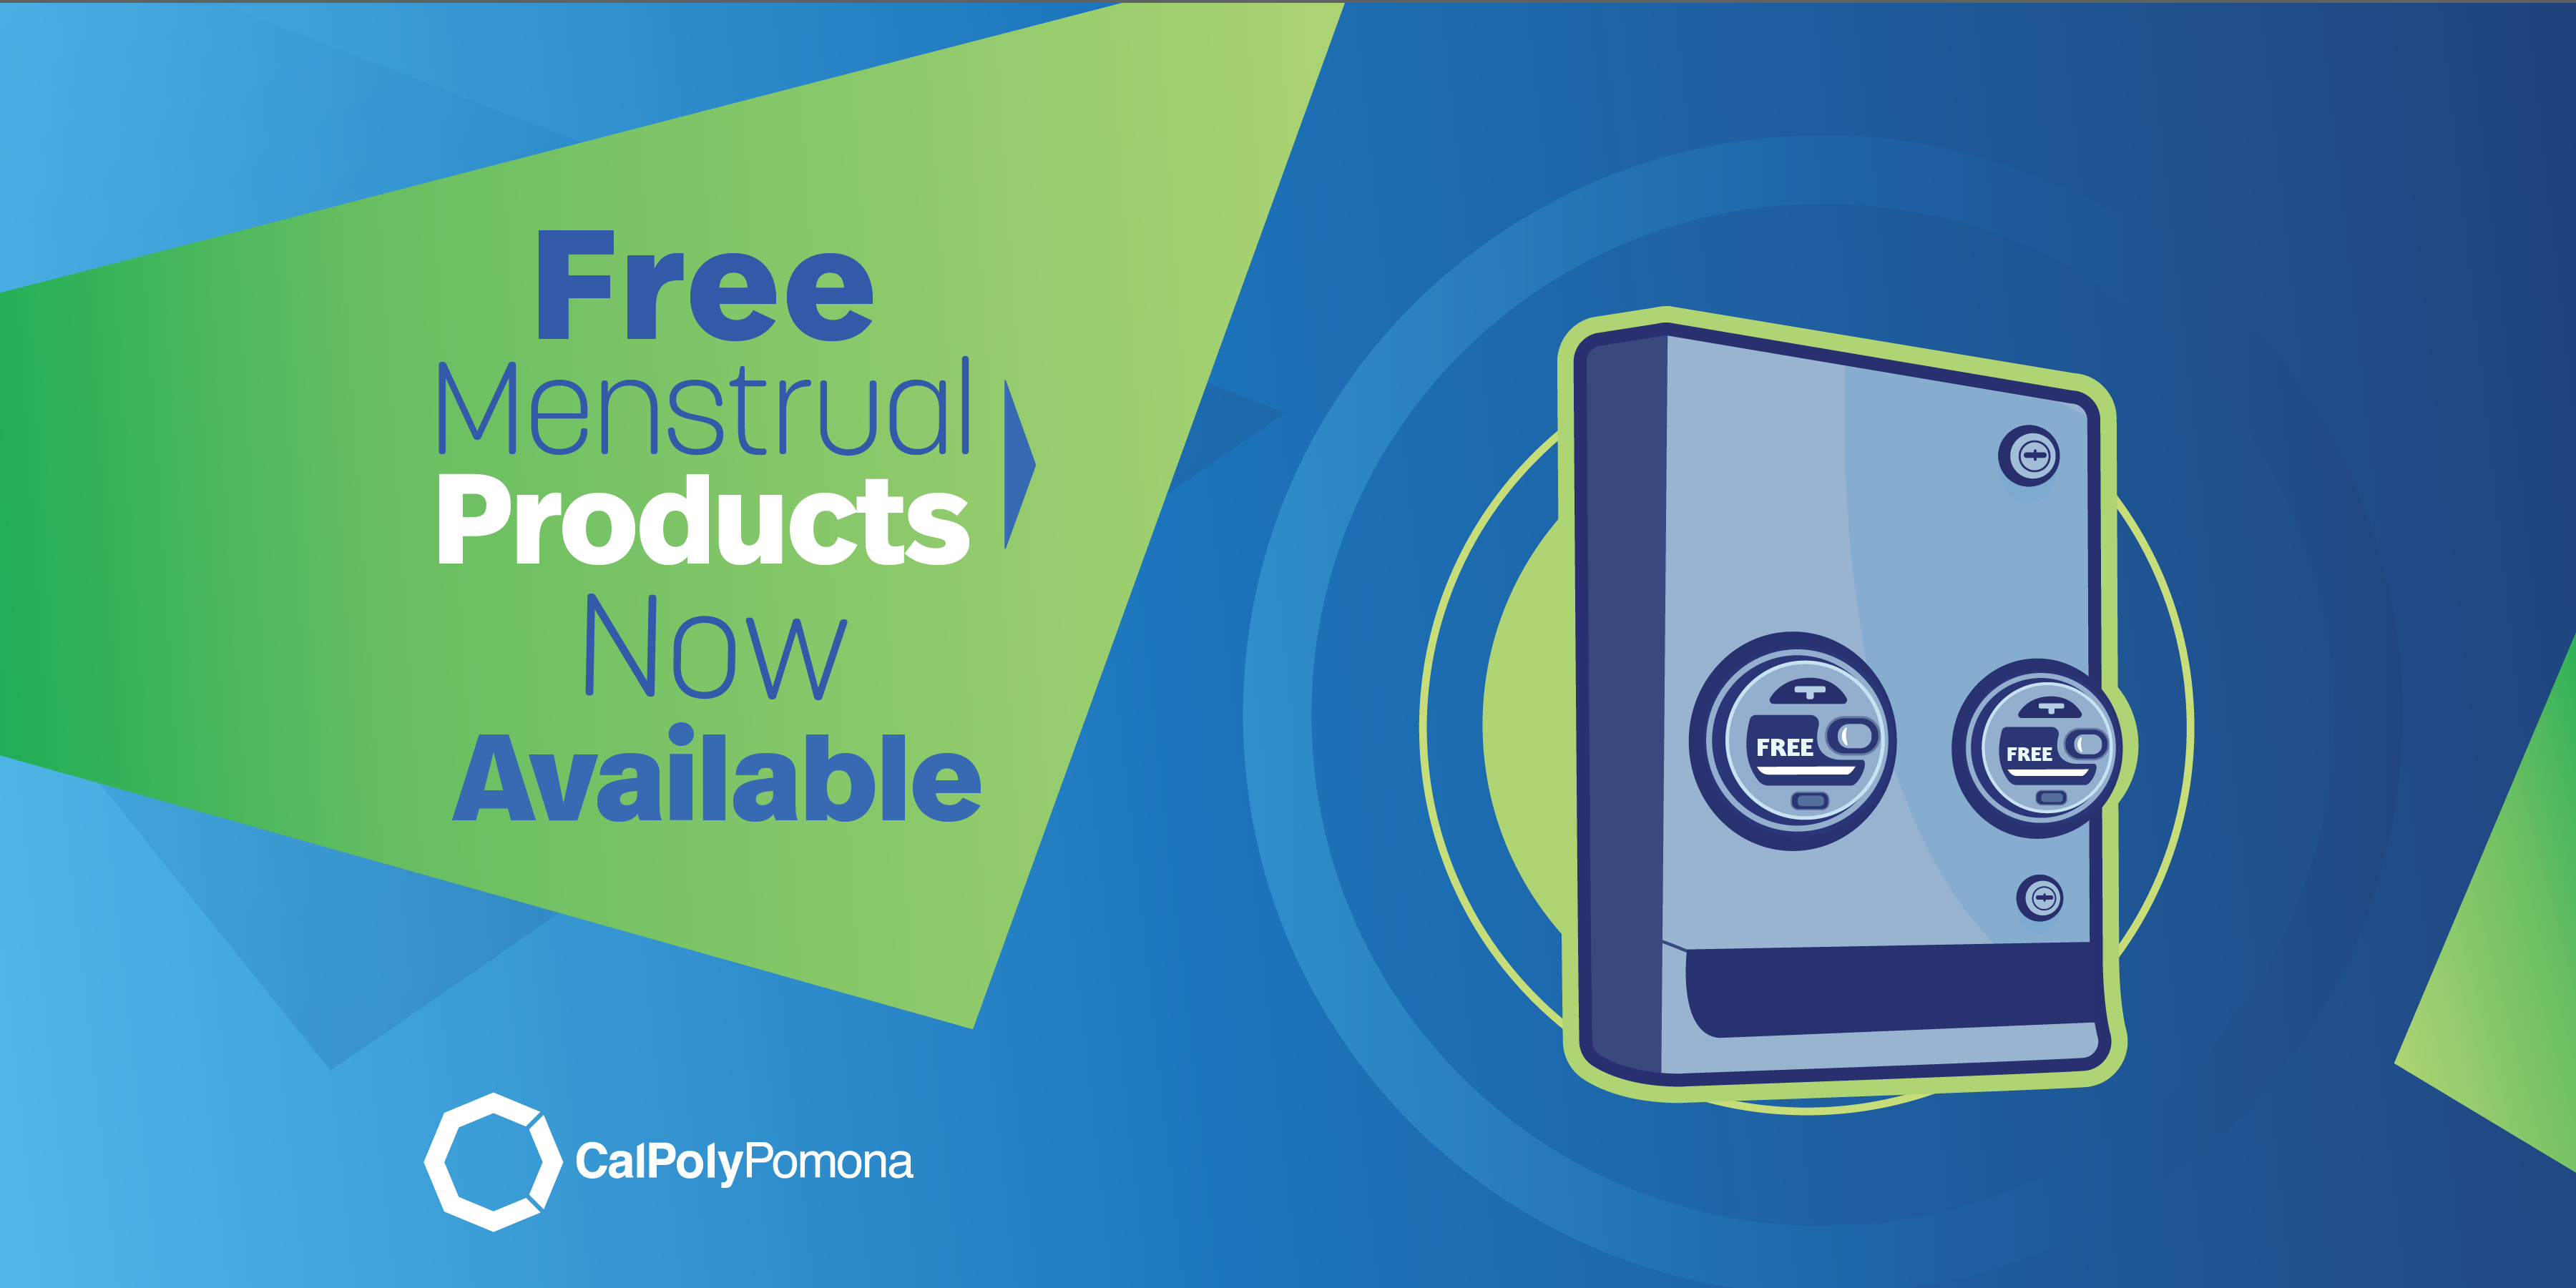 Free Menstrual products now available